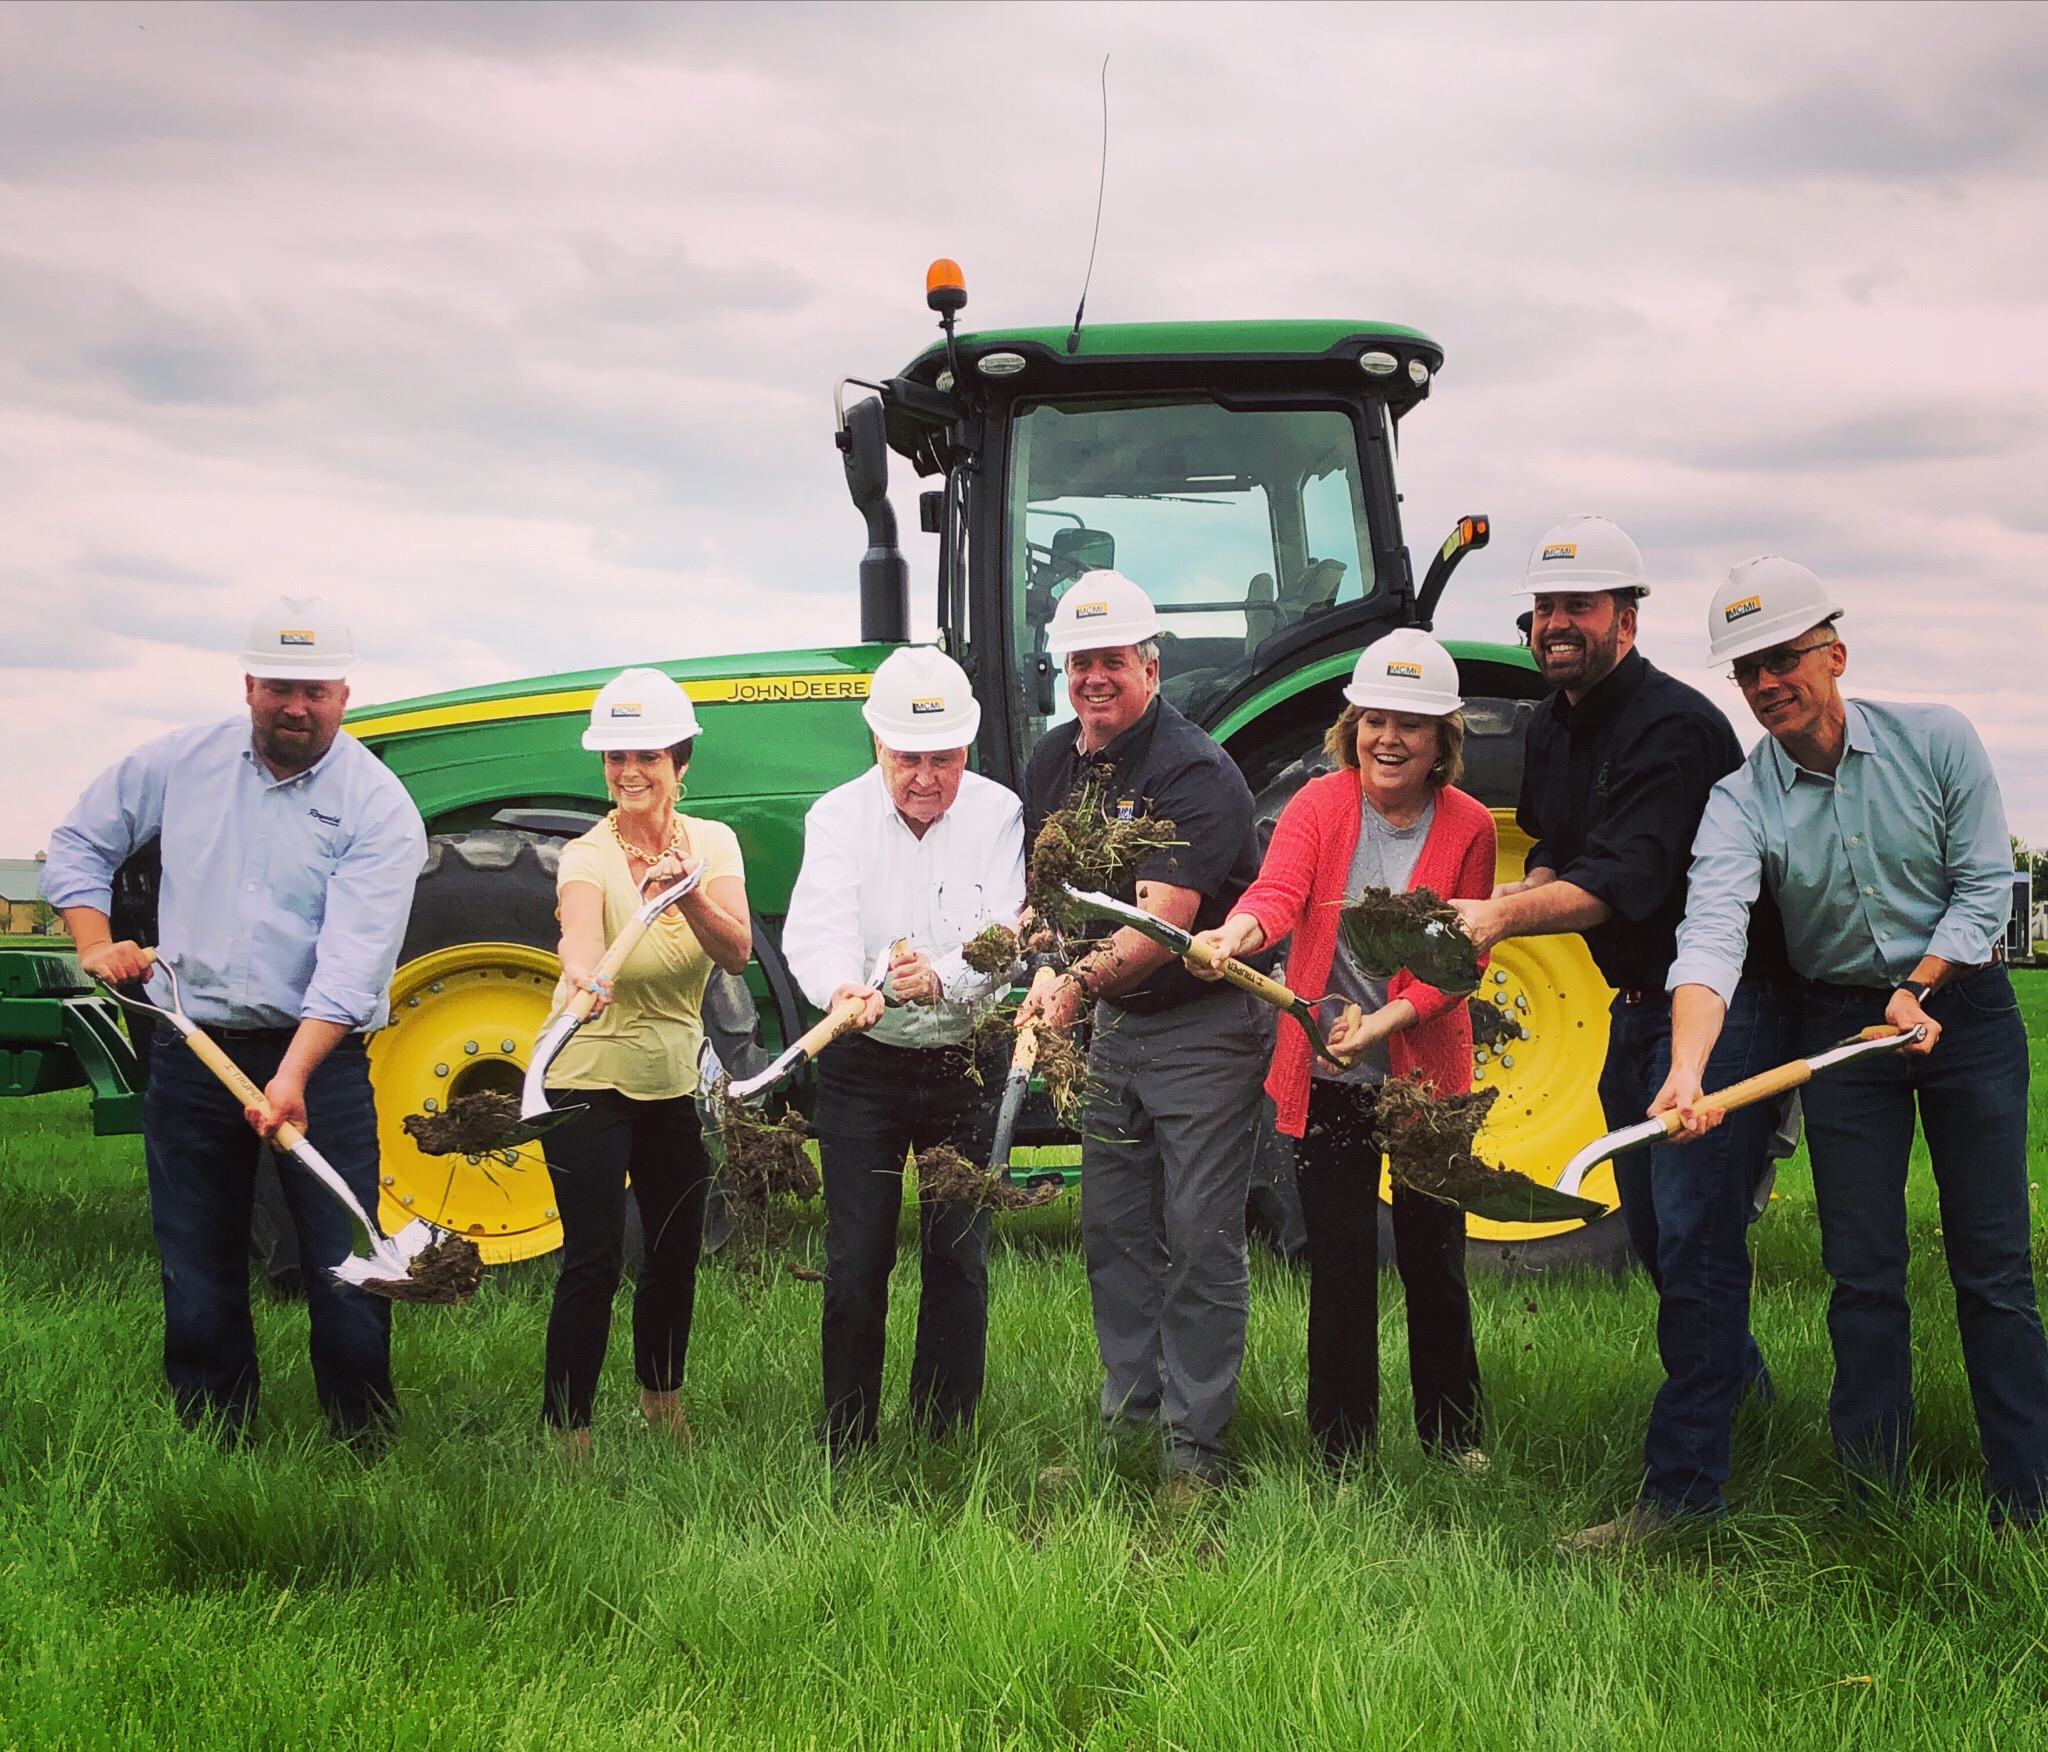 Image is of the Reynolds executive in white hard hats breaking ground at the new location in Lebanon. They have a backdrop of a John Deere agricultural tractor.